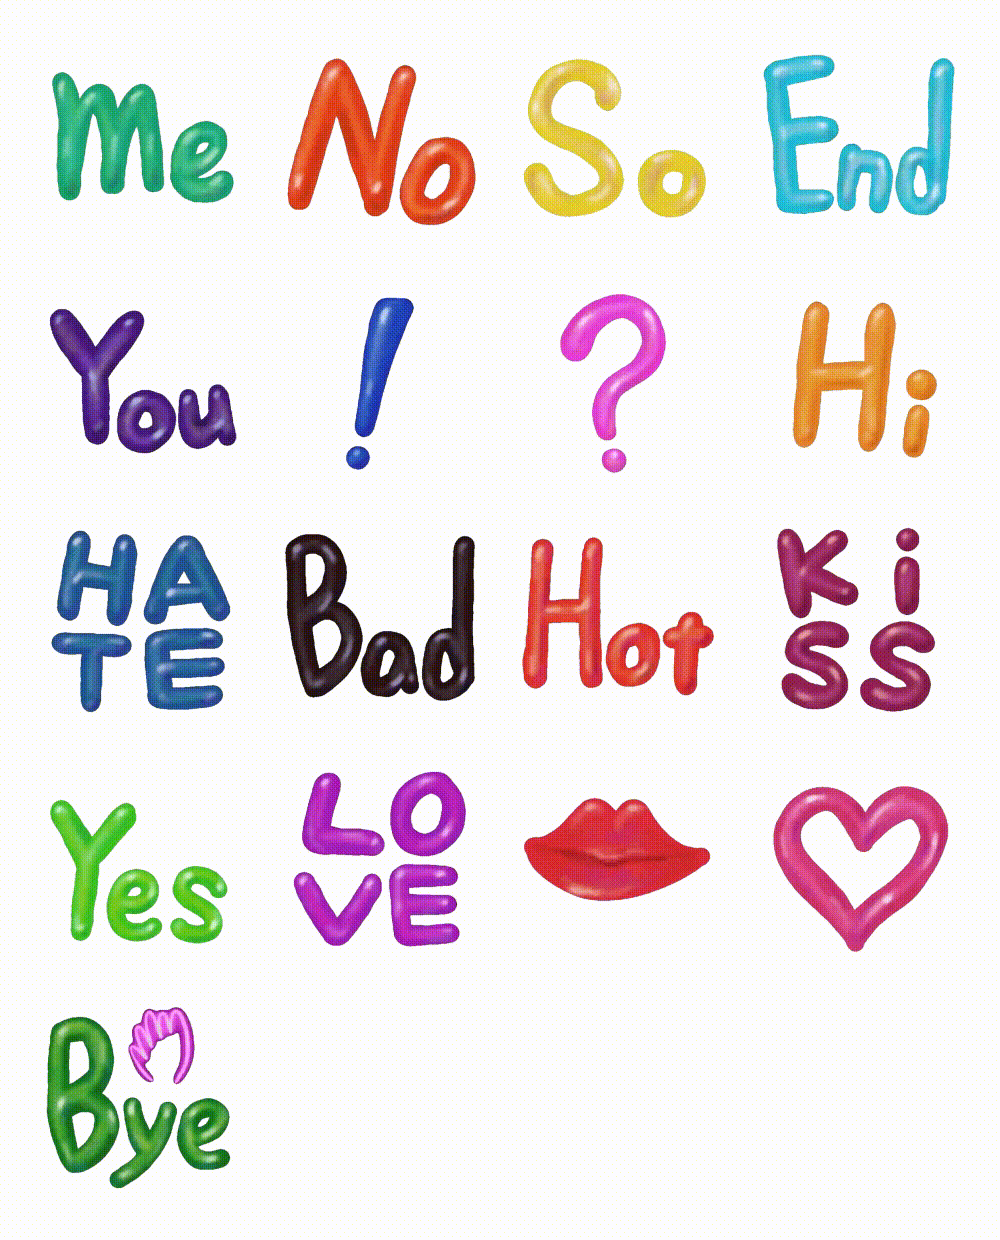 Colorful balloon messages 2. Animation/Cartoon,Phrases,Romance sticker pack for Whatsapp, Telegram, Signal, and others chatting and message apps